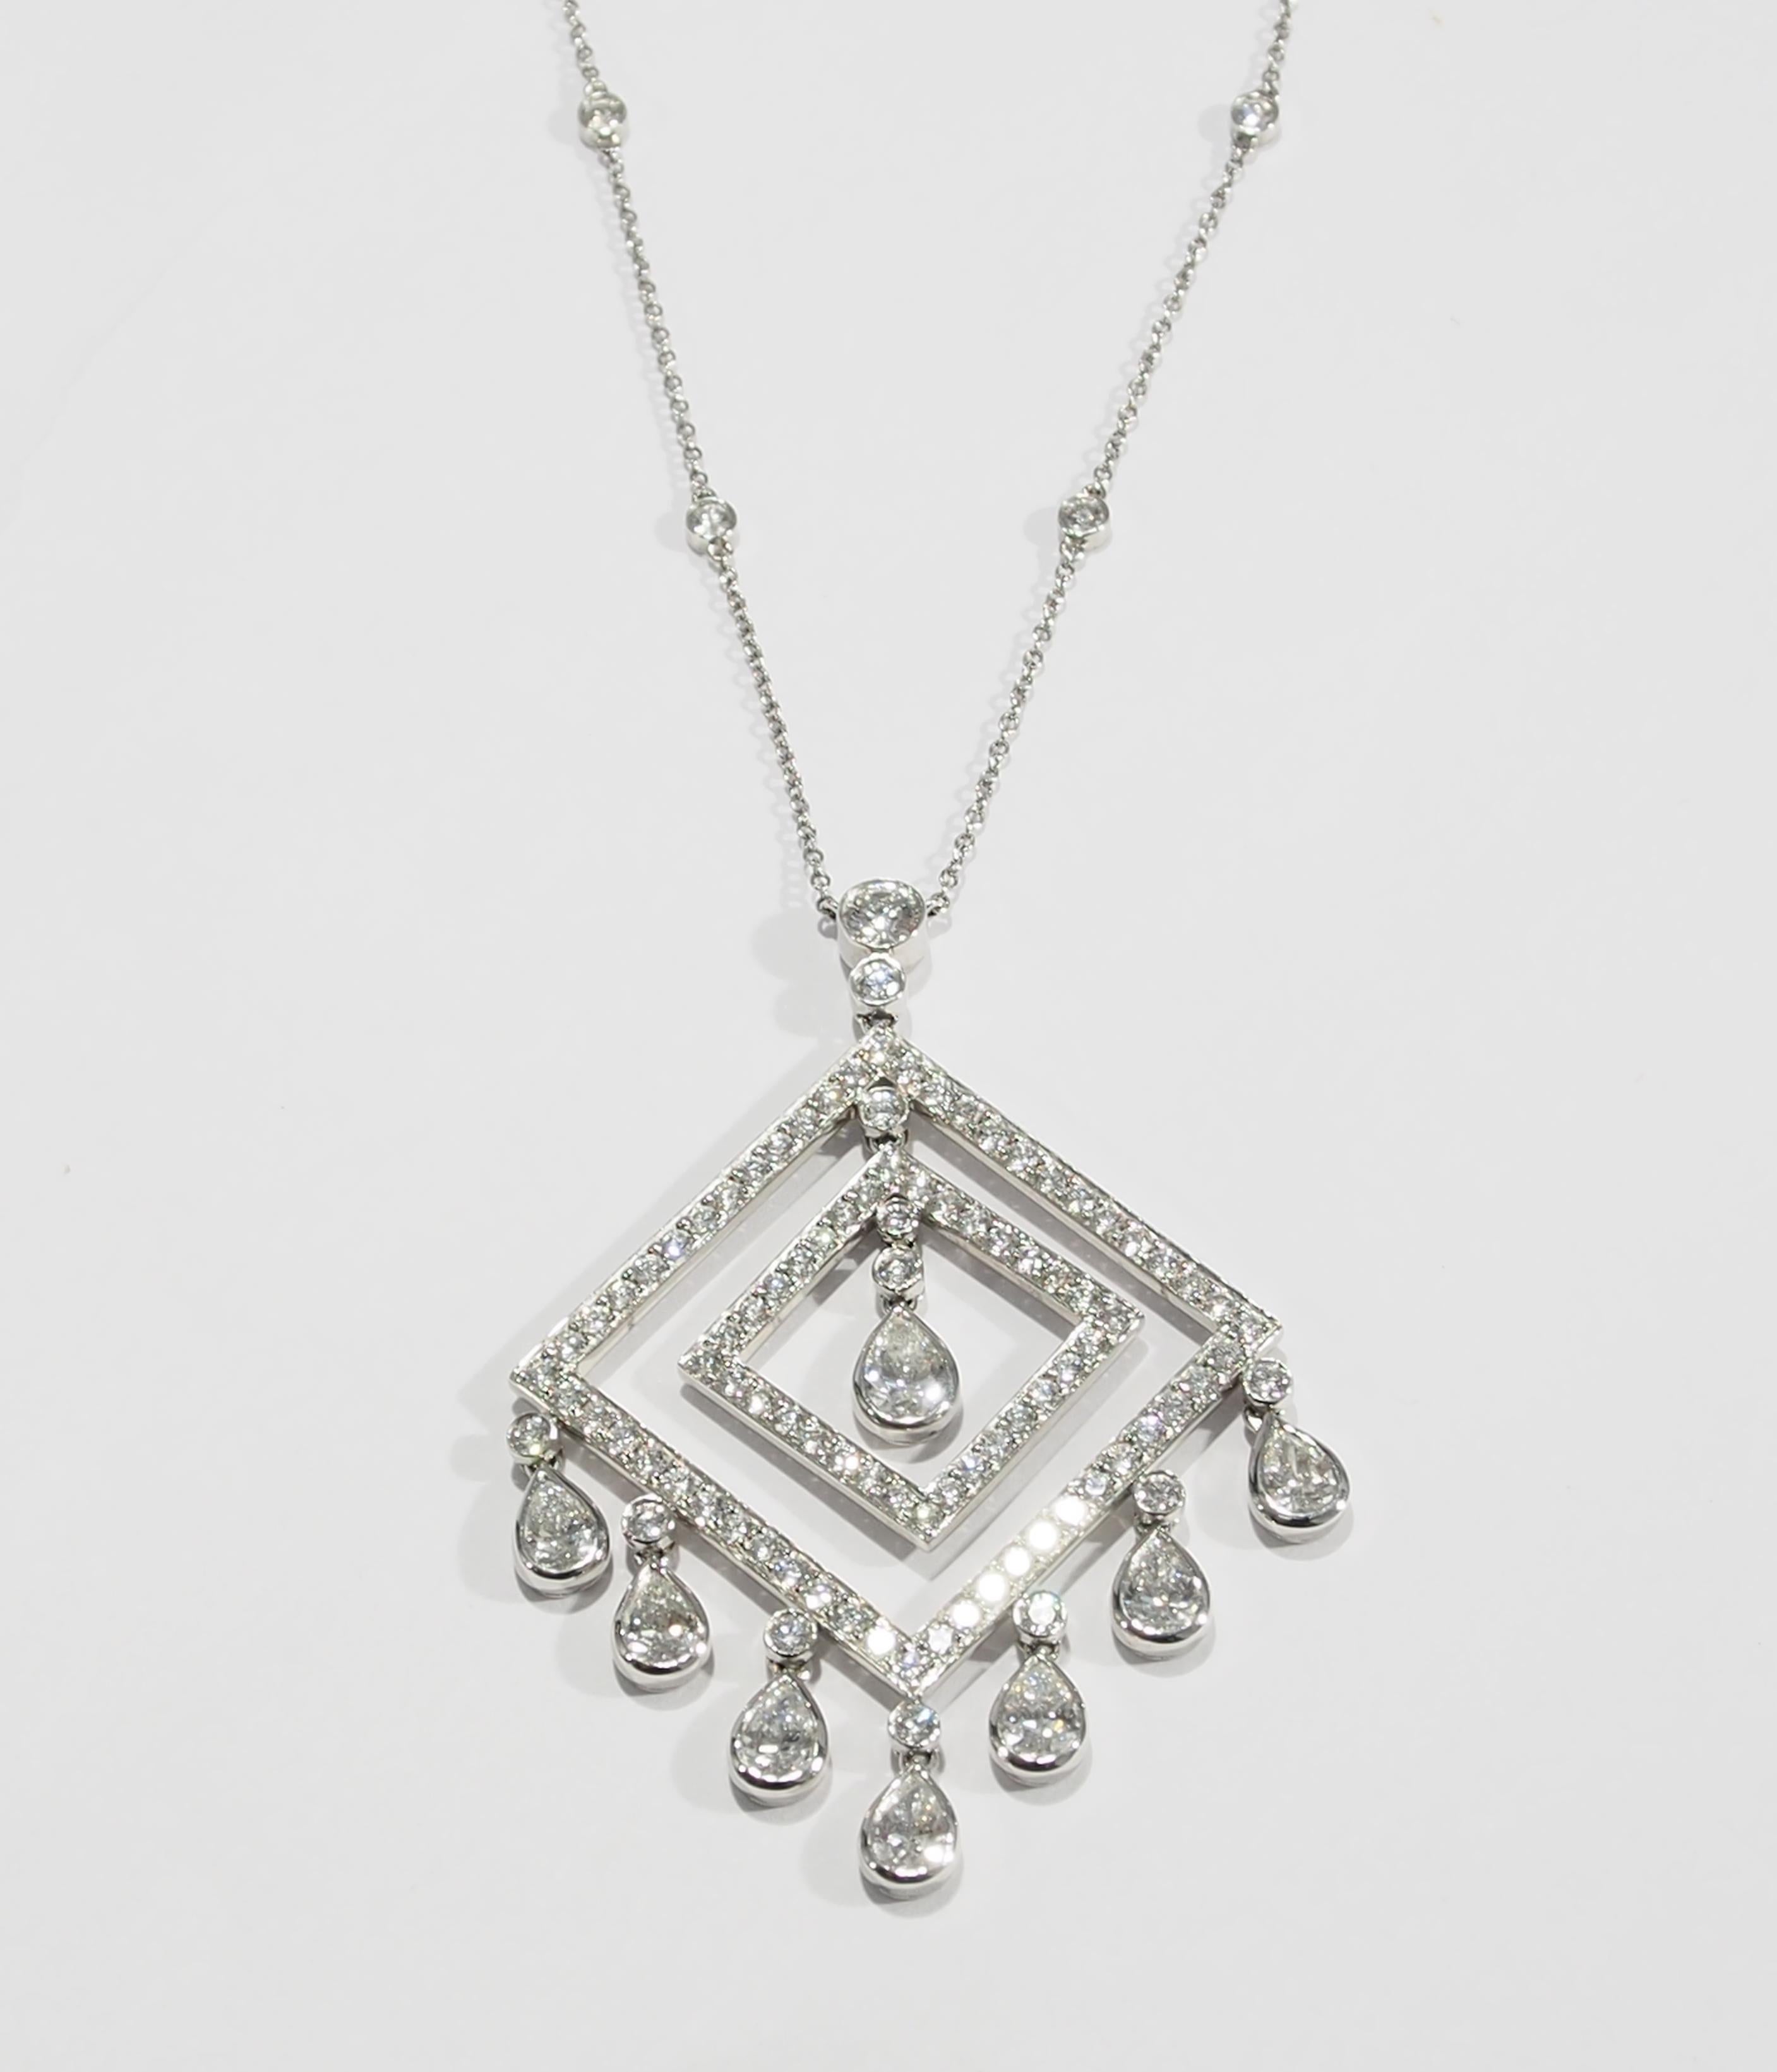 From the iconic jewelry designer, Tiffany & Co. is this stunning vintage Platinum Diamond Pendant. The Pendant is fashioned in a geometric style with (2) concentric Squares that have (8) Pear Shape Diamond 